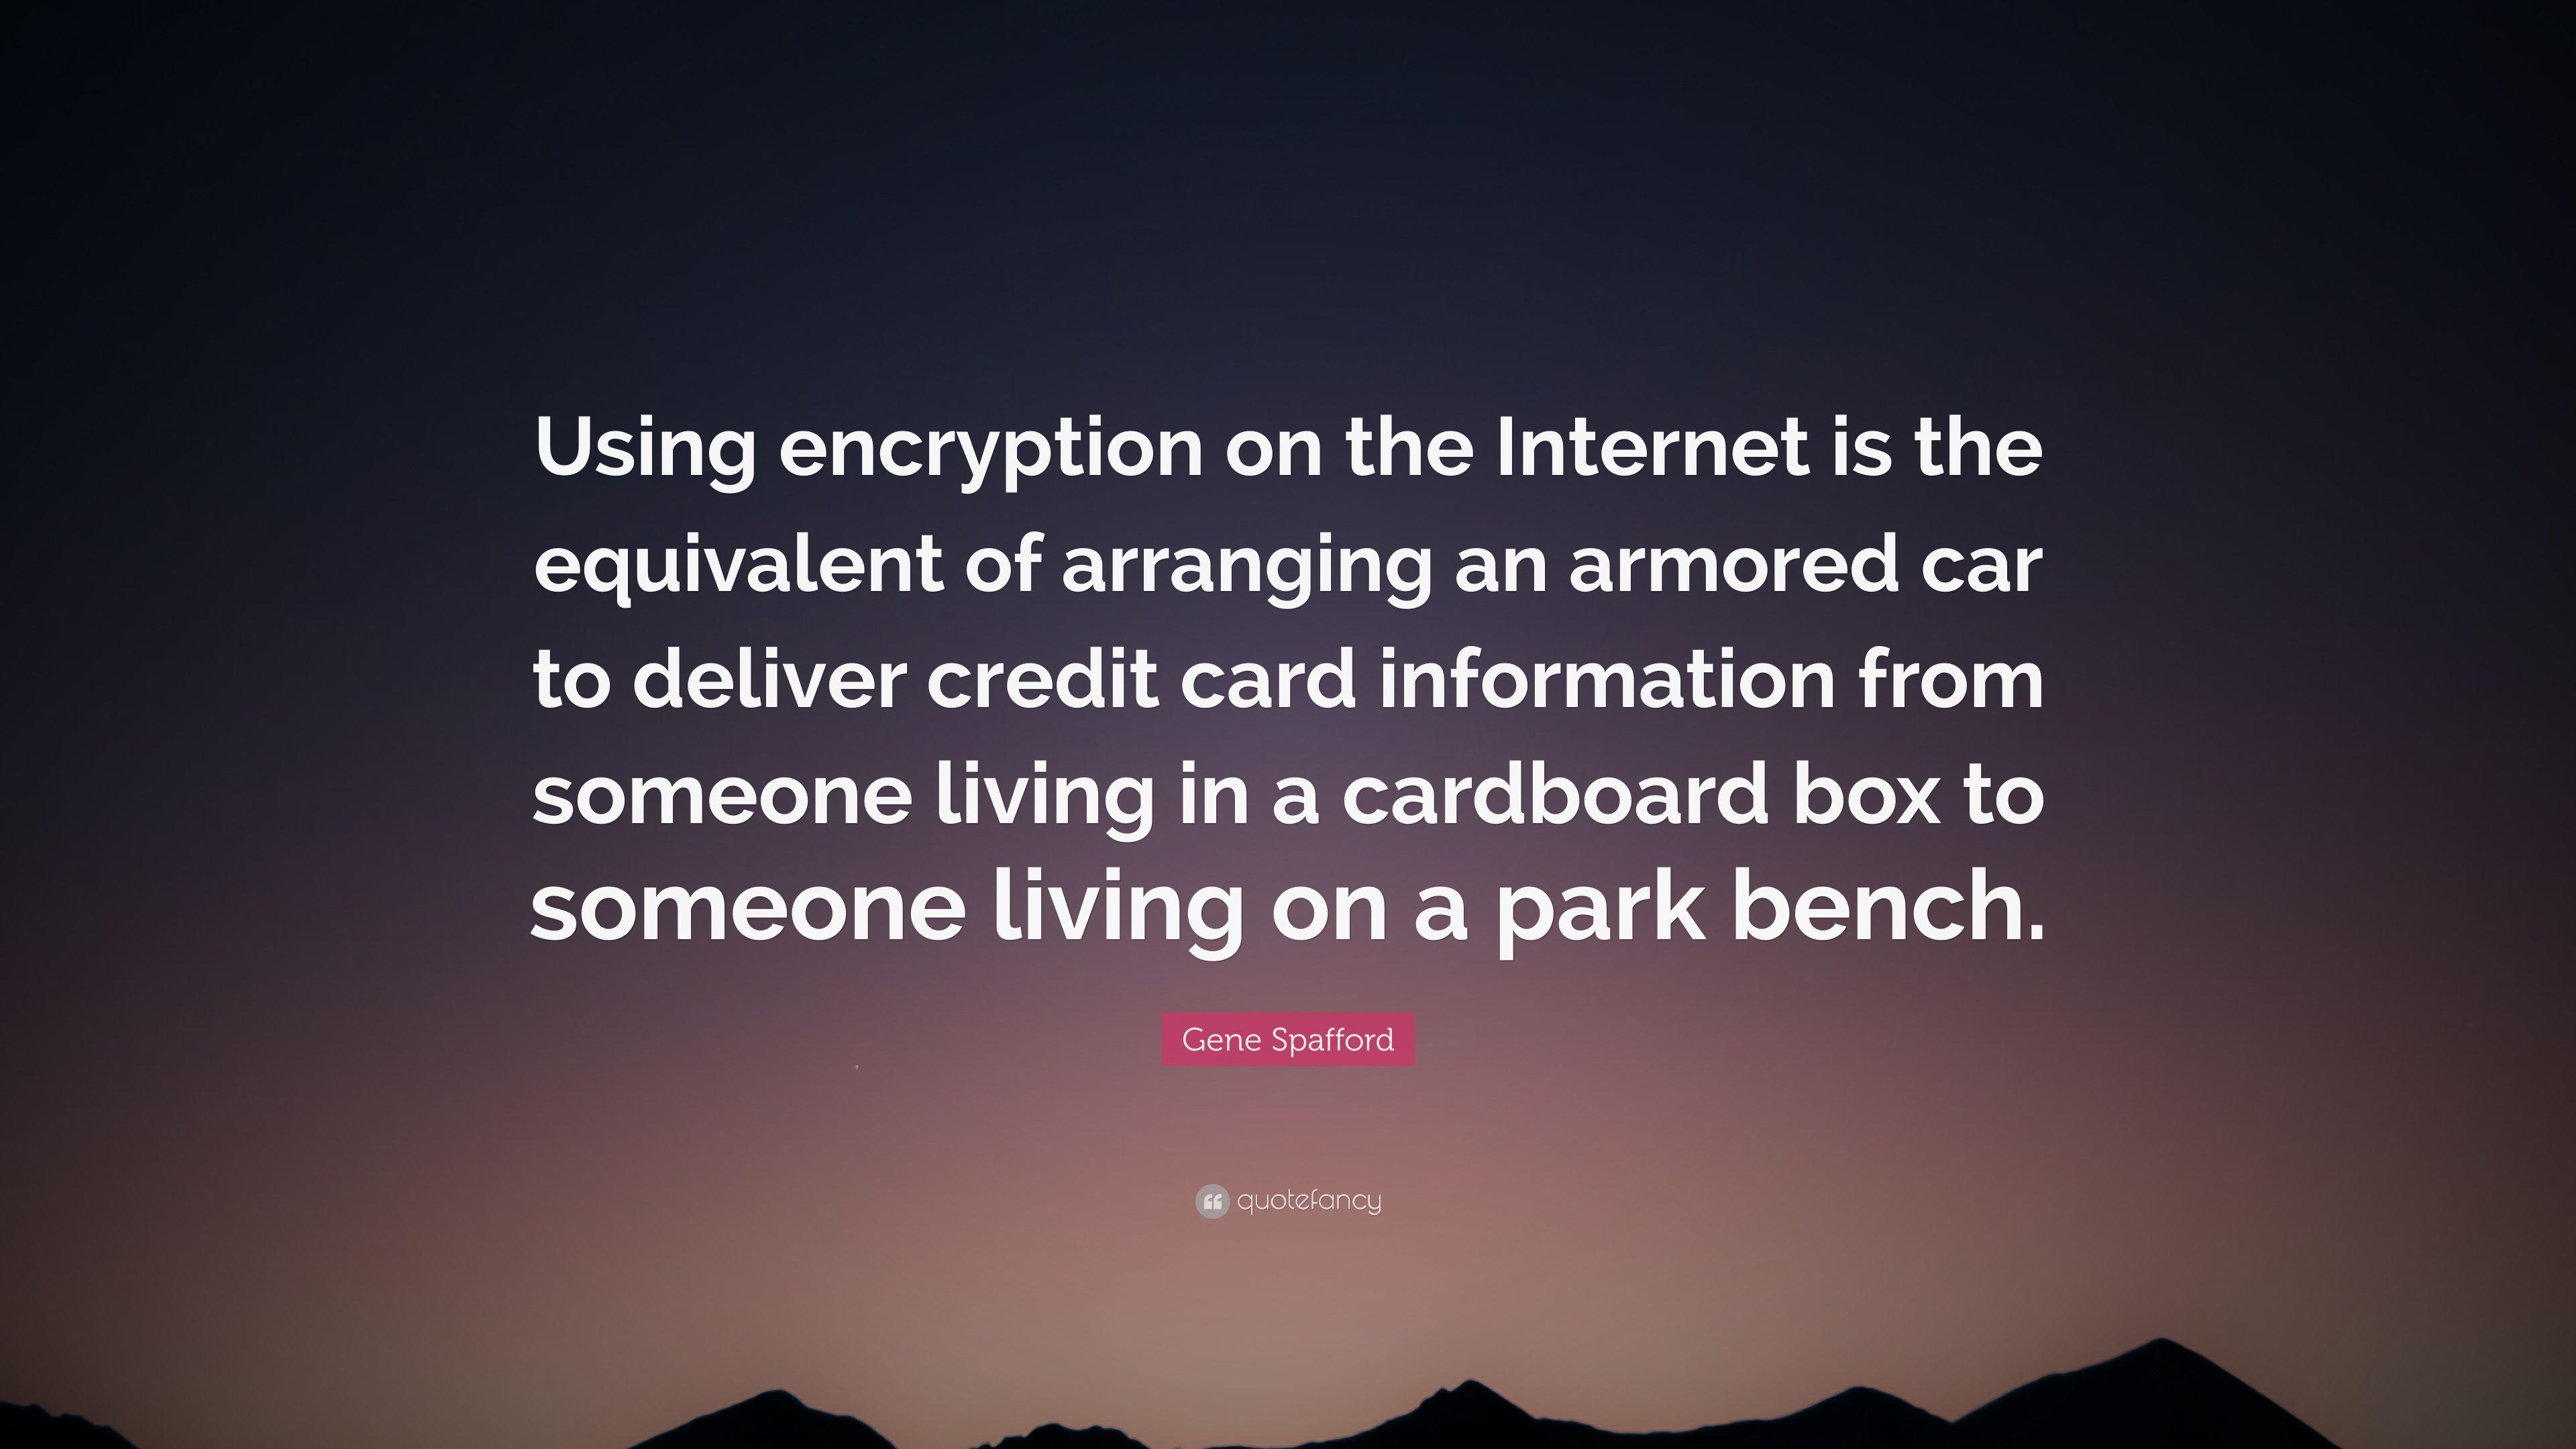 Gene Spafford Quote: “Using encryption on the Internet is